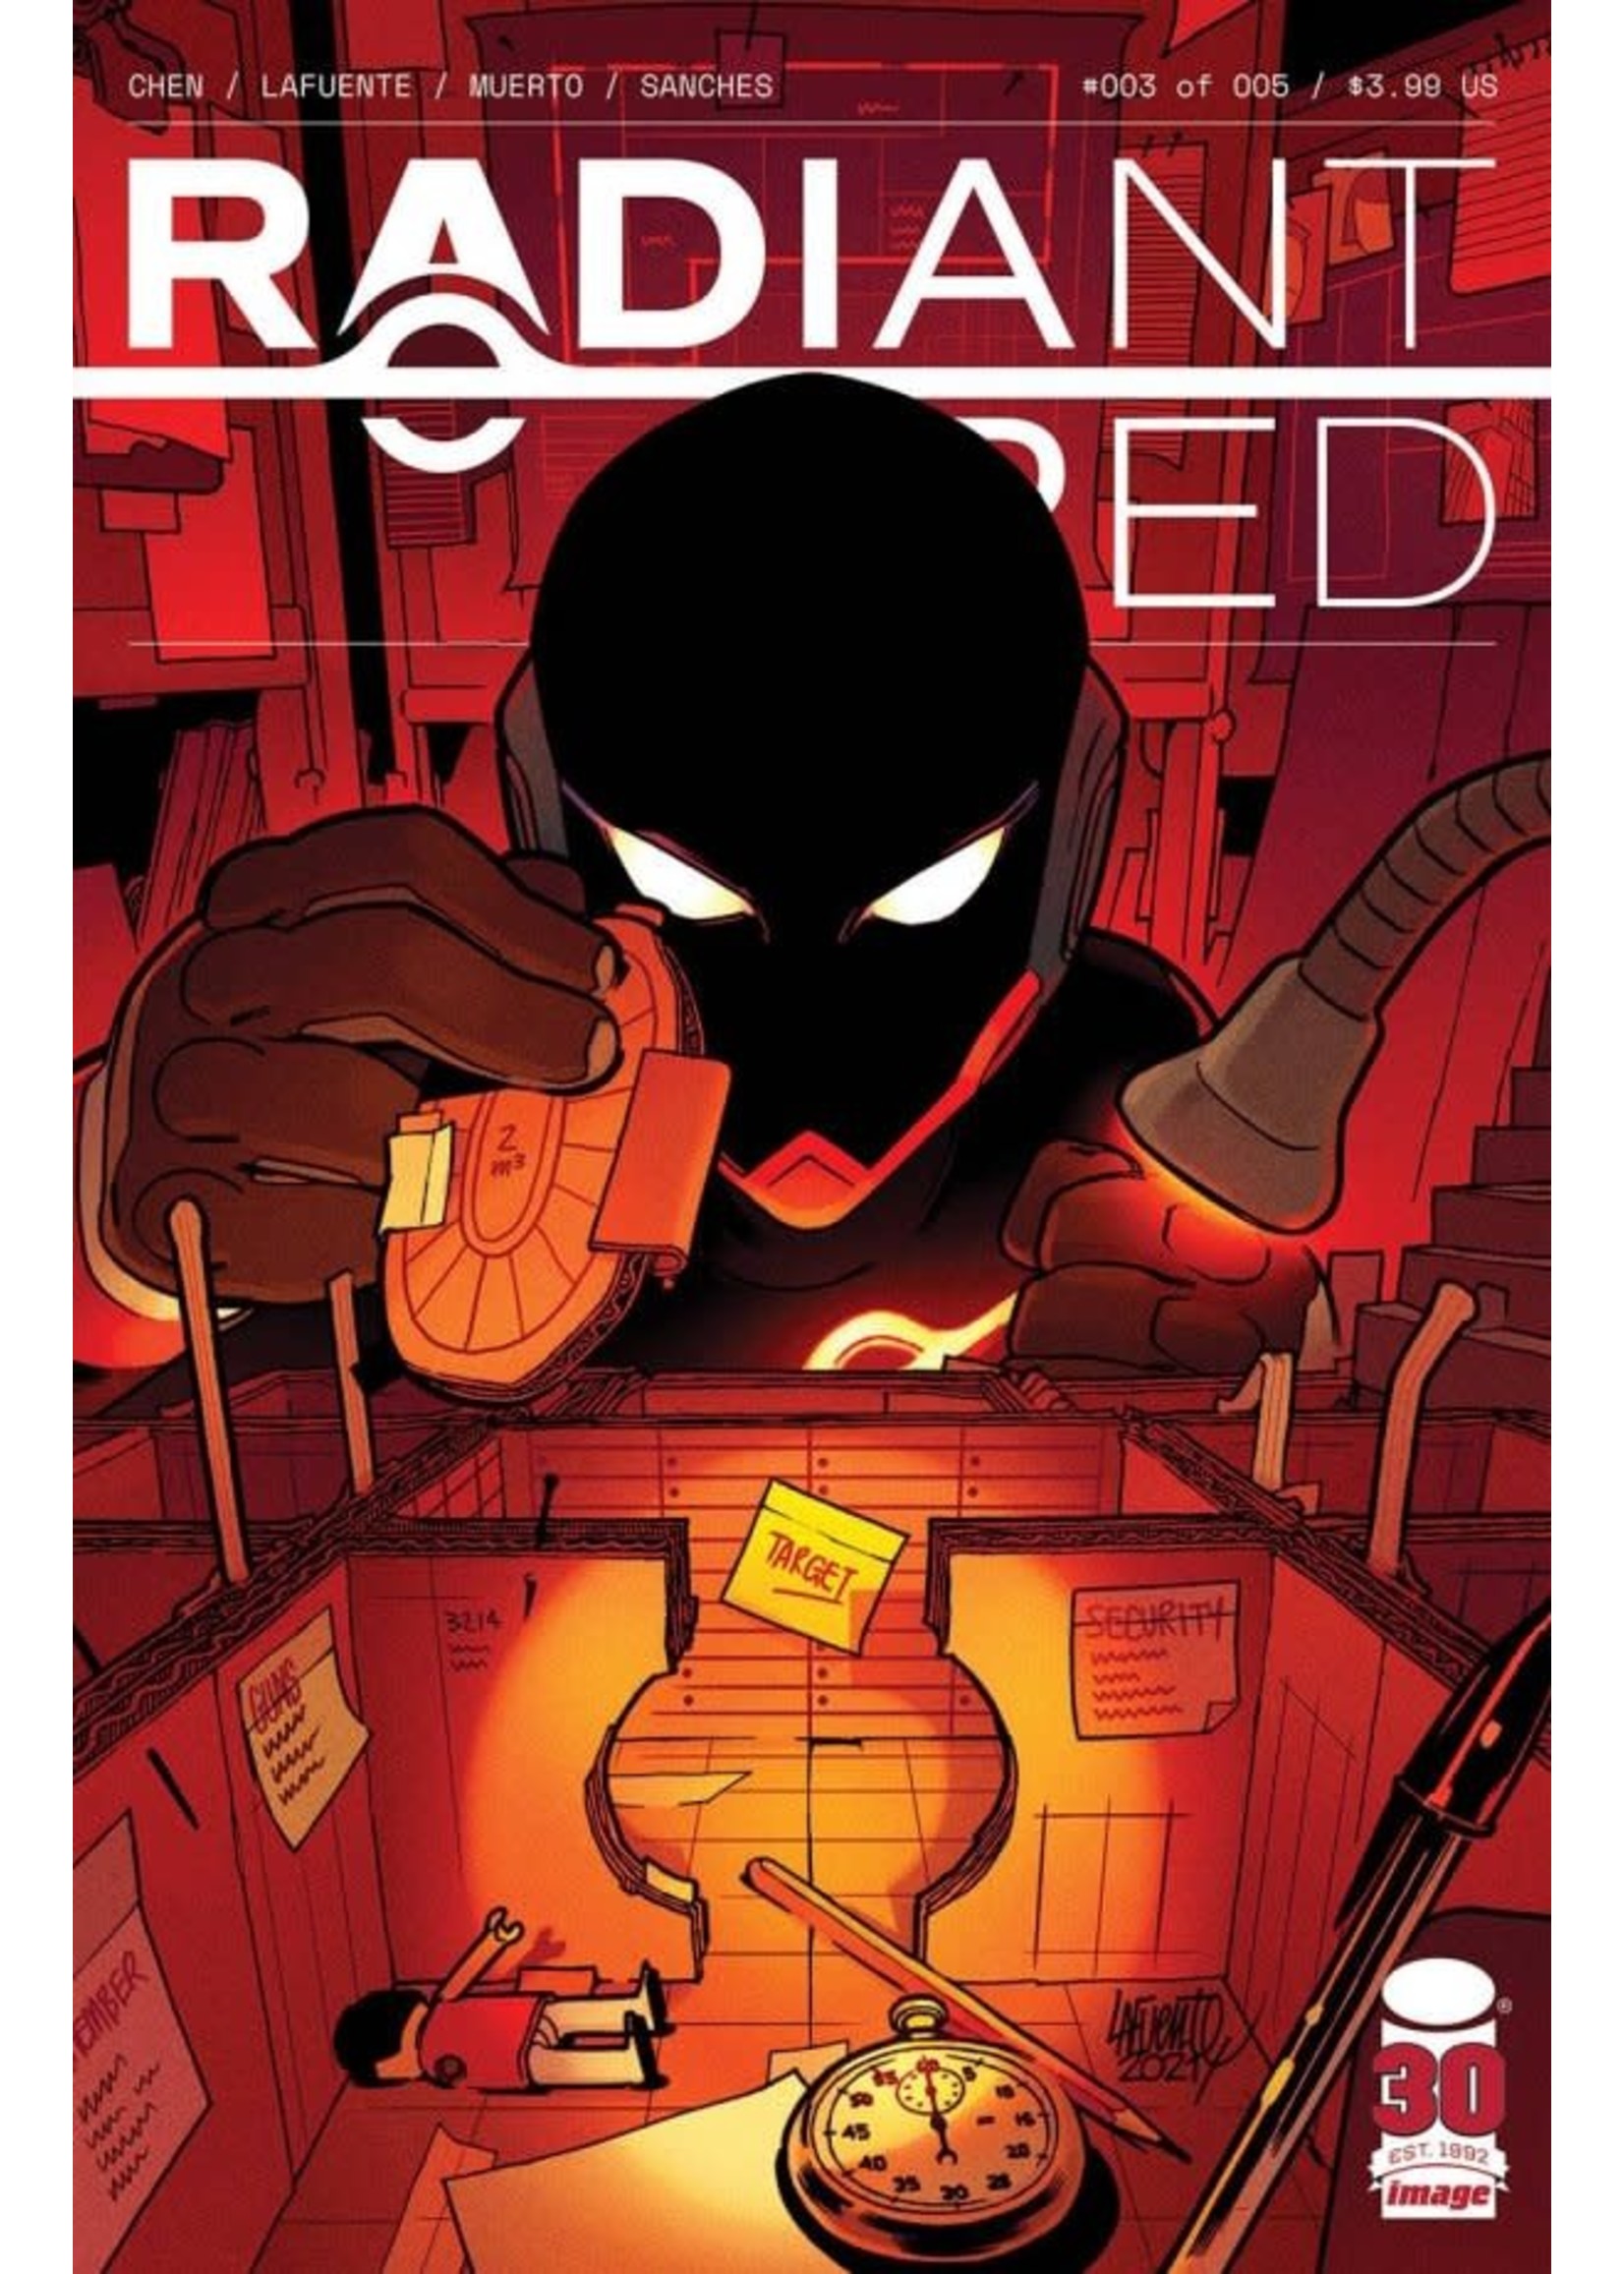 Radiant Red #3 (Of 5) Cvr A Lafuente & Muerto